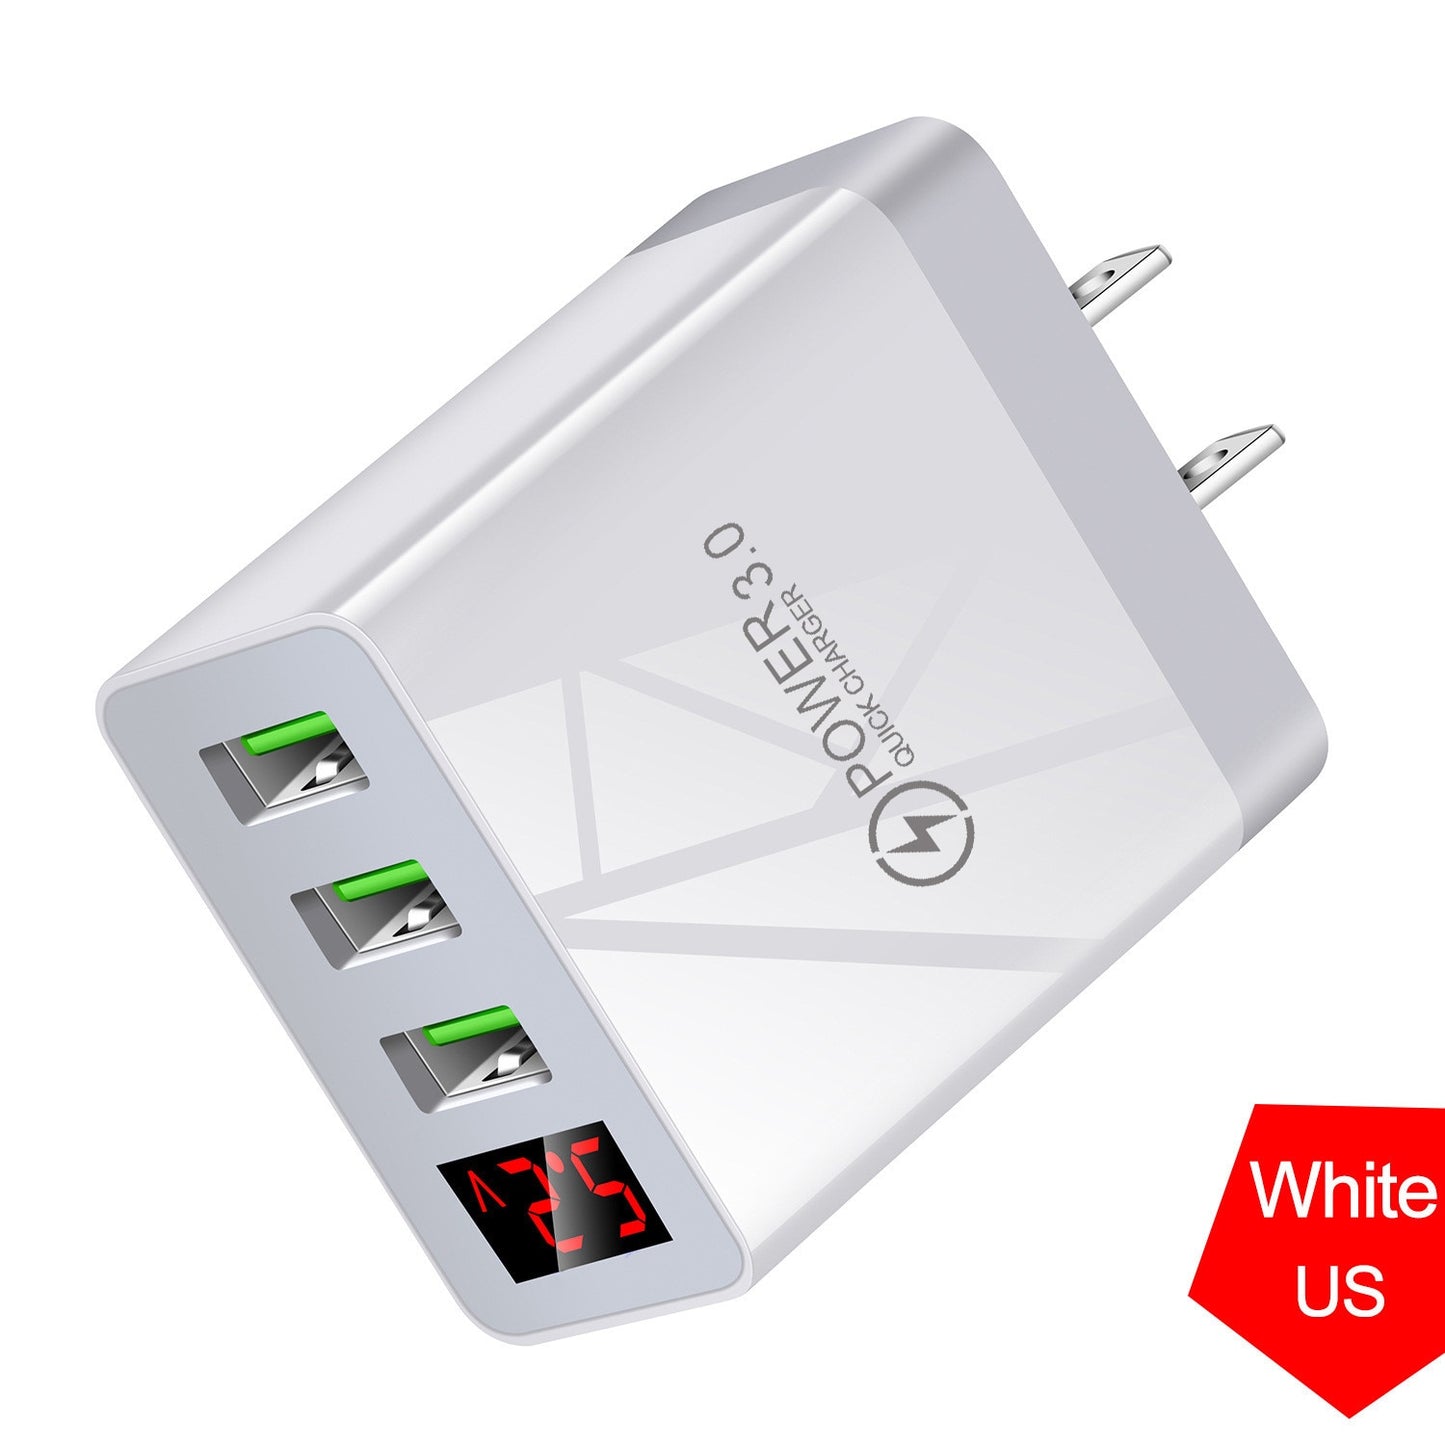 Quick charge 3.0 USB Charger for iPhone 12 pro 11 Xiaomi Samsung Huawei 5V 3A Digital Display Fast Charging Wall Phone Charger